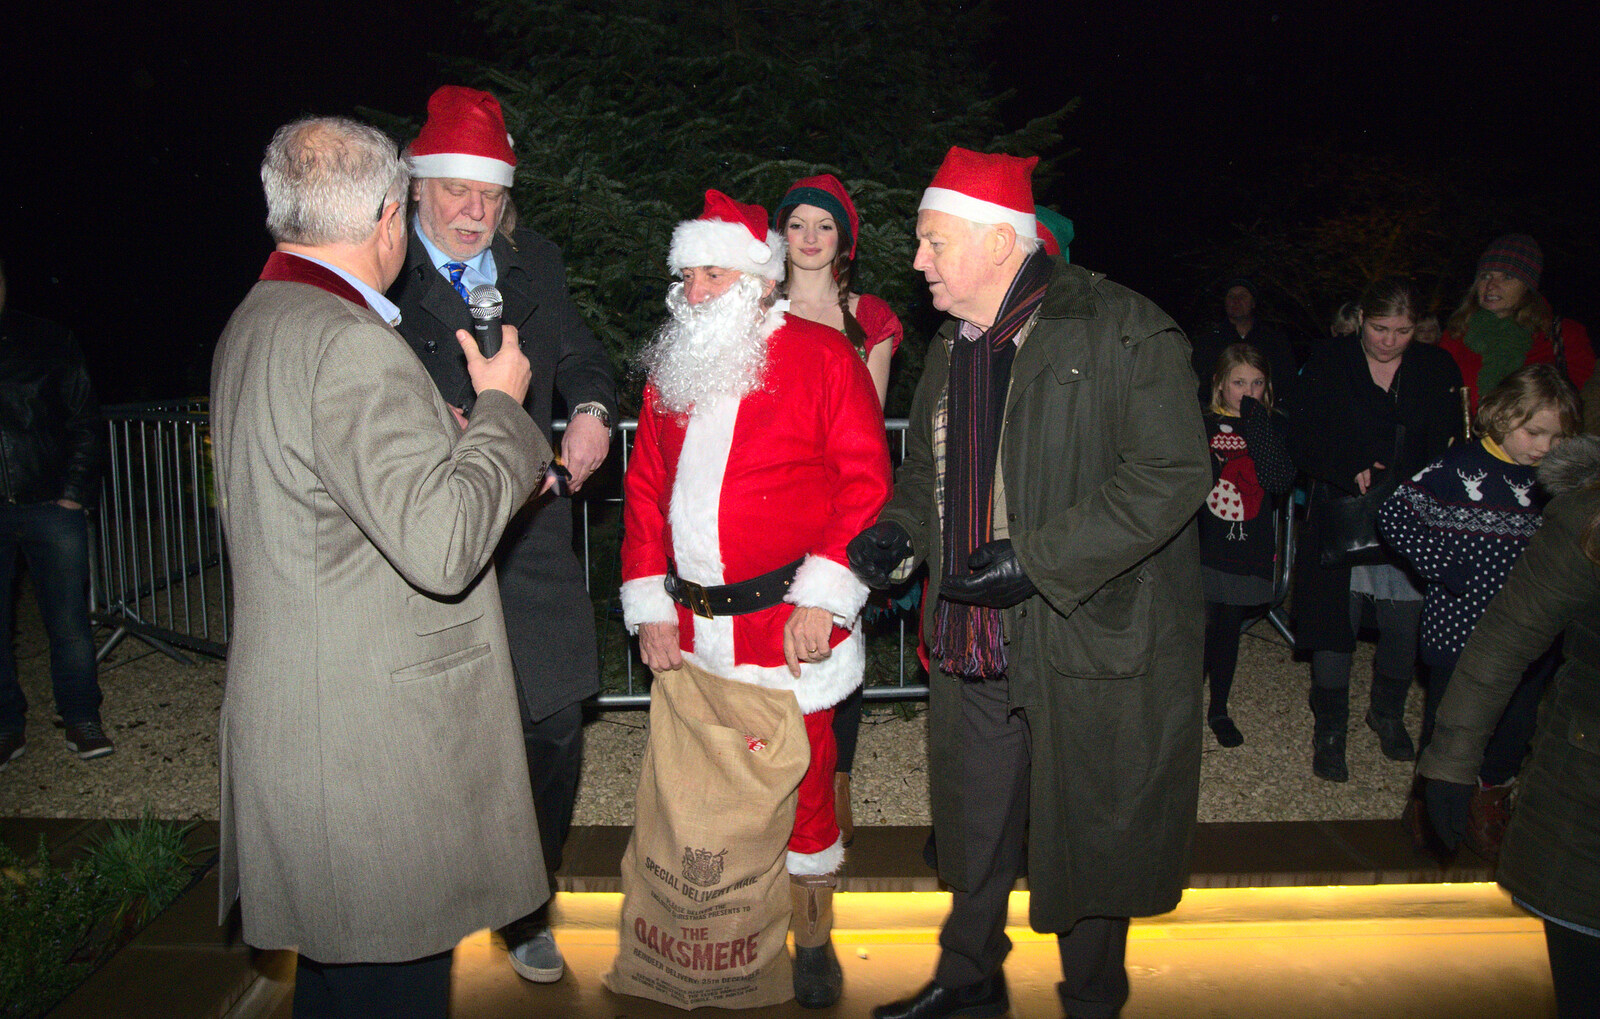 Santa has a sack of presents from Rick Wakeman, Ian Lavender and the Christmas lights, The Oaksmere, Suffolk - 4th December 2014